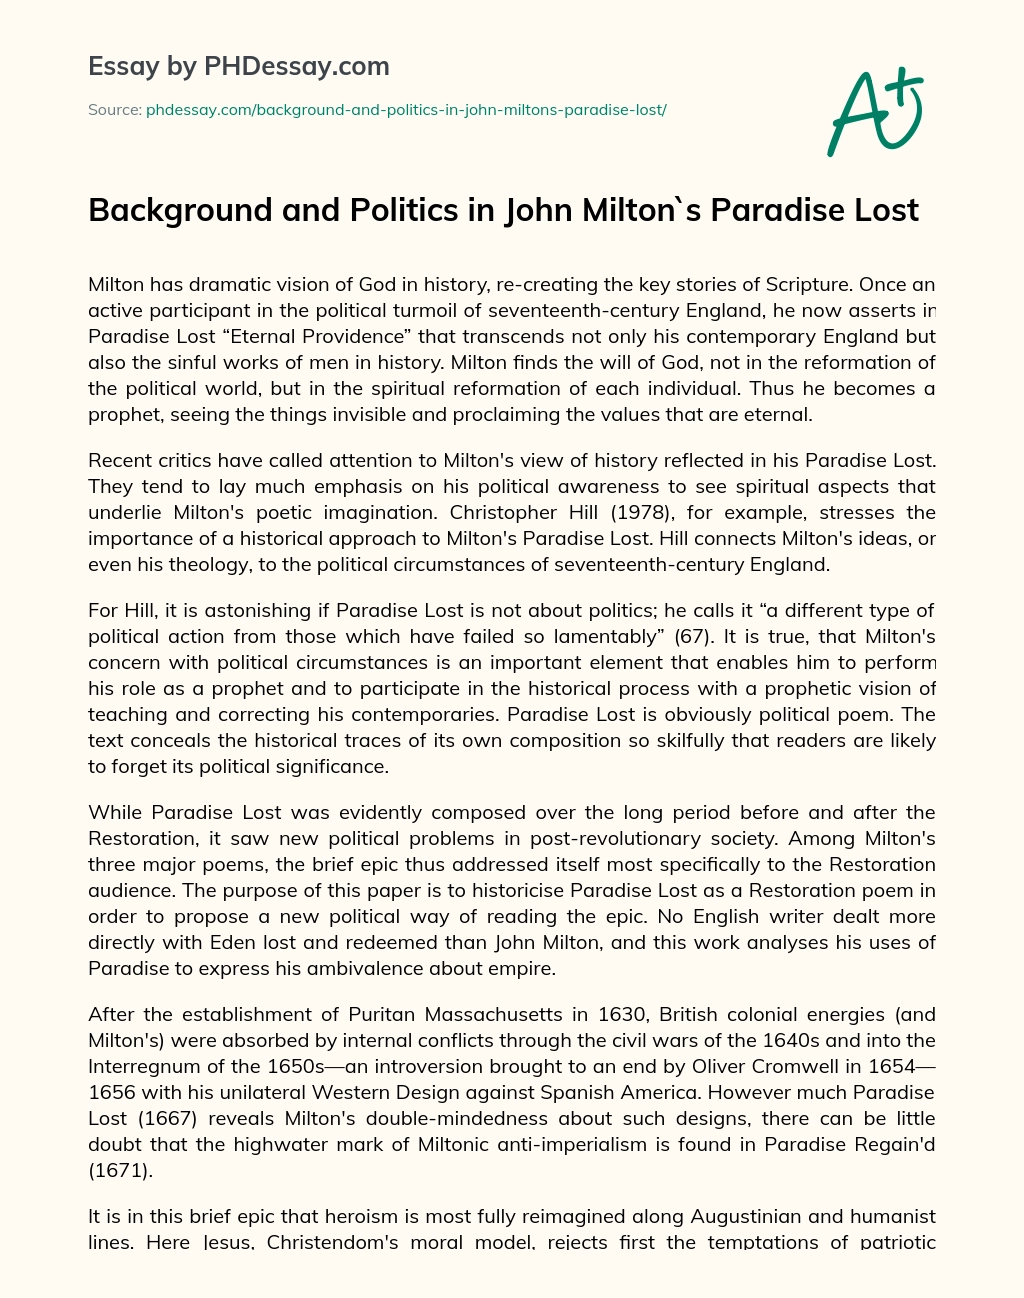 Background and Politics in John Milton`s Paradise Lost essay